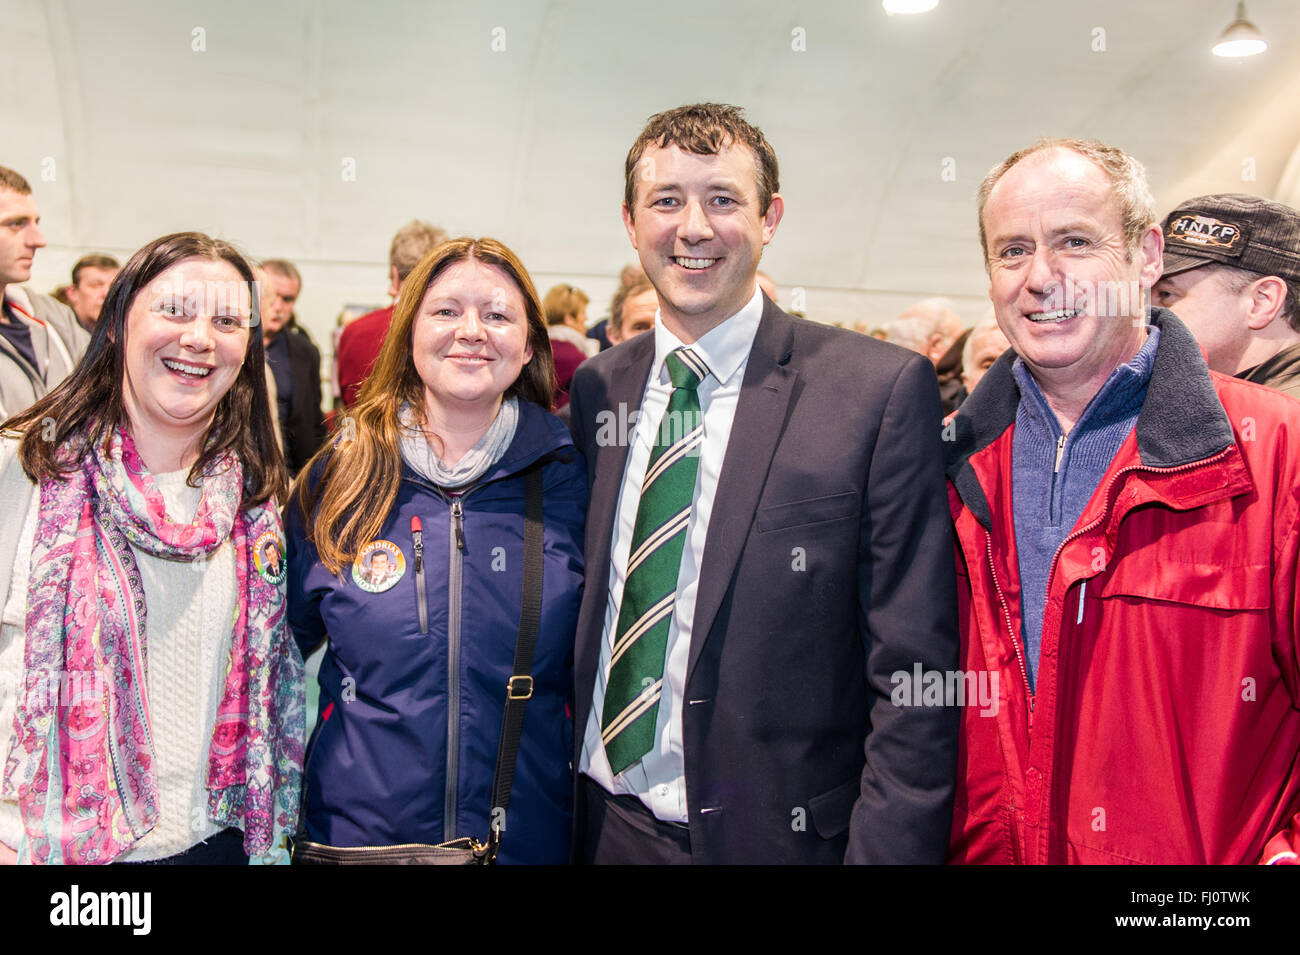 Ballincollig, Ireland. 27th February, 2016. Pictured at the 2016 General Election count in Coláiste Choilm, Ballincollig before the announcement of the first count were: Caitriona O'Leary; Shelia O'Leary; Fianna Fáil Candidate Aindrias Moynihan and Noel Murphy. Credit: AG News/Alamy Live News Stock Photo